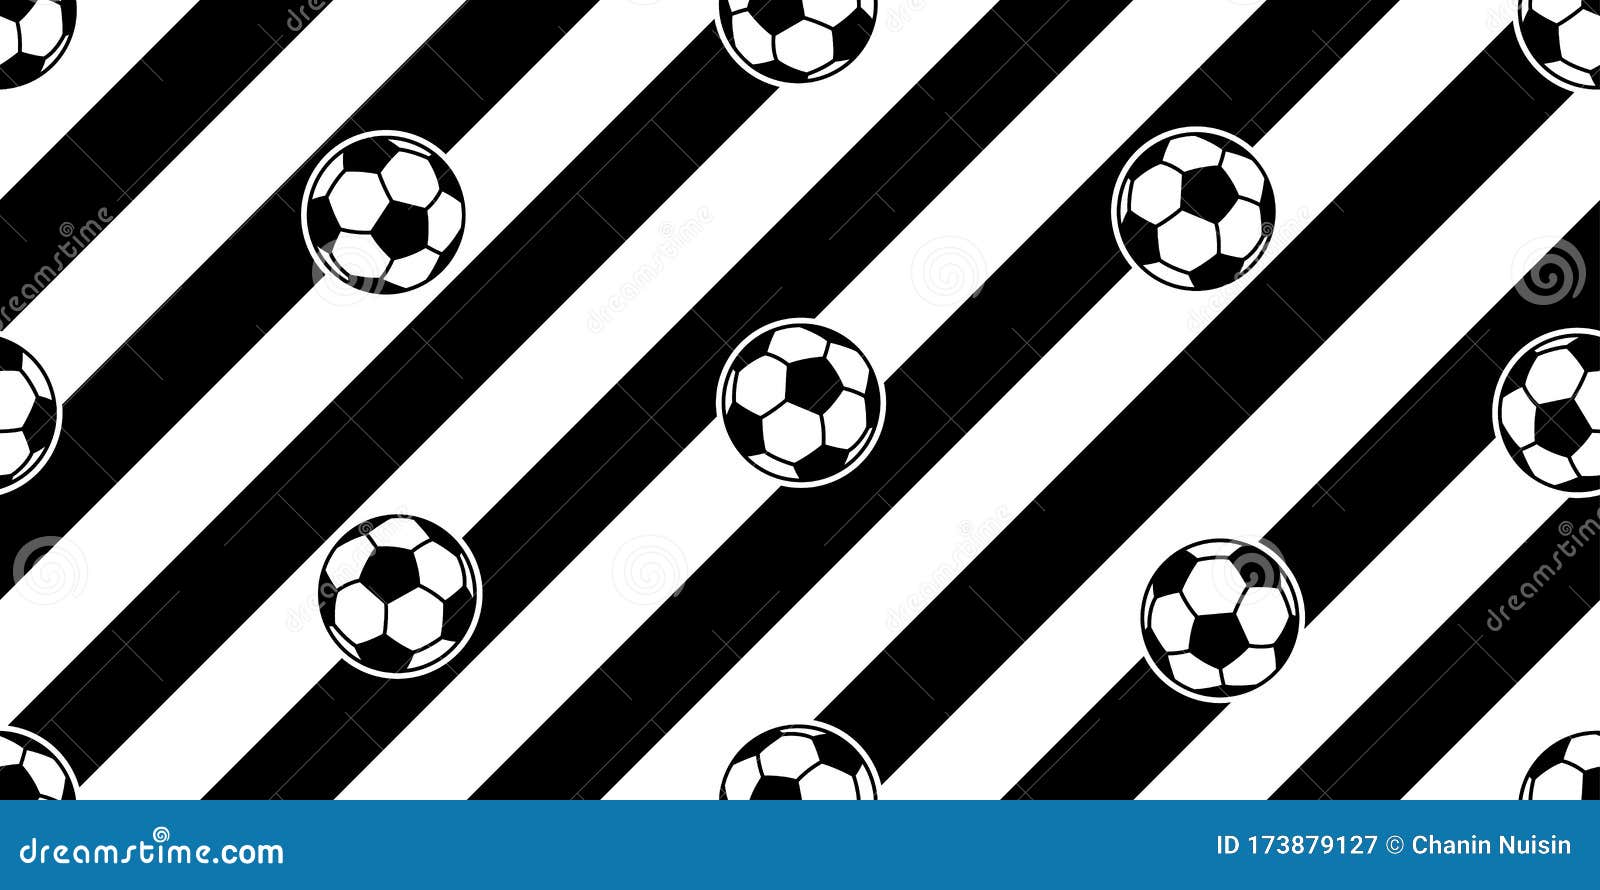 Ball Football Soccer Seamless Pattern Vector Sport Cartoon Stripes Scarf  Isolated Repeat Wallpaper Tile Background Illustration Do Stock Vector -  Illustration of repeat, colorful: 173879127